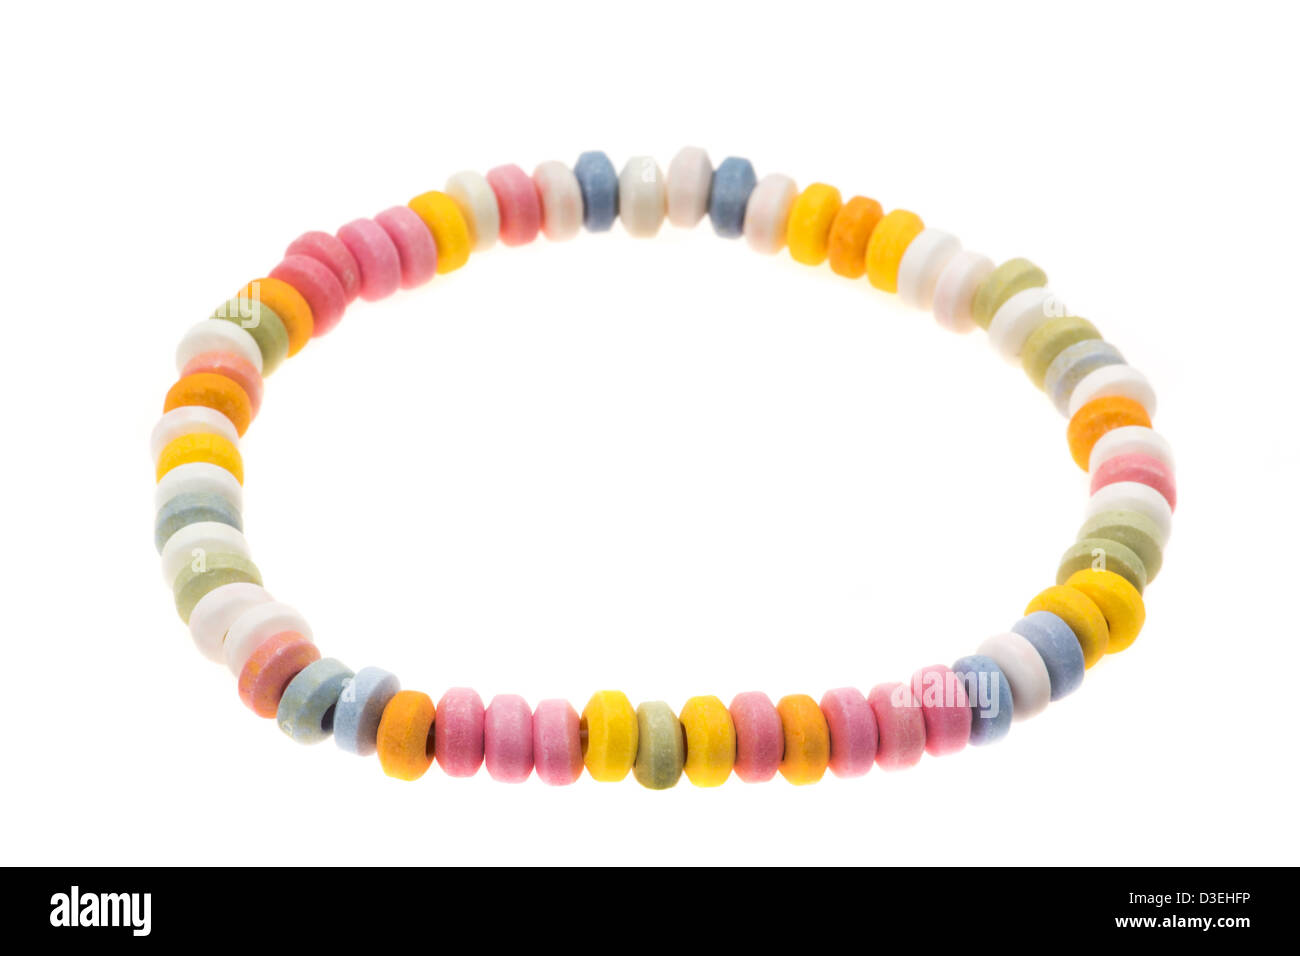 A sweet edible candy necklace - studio shot with a shallow depth of field and white background Stock Photo